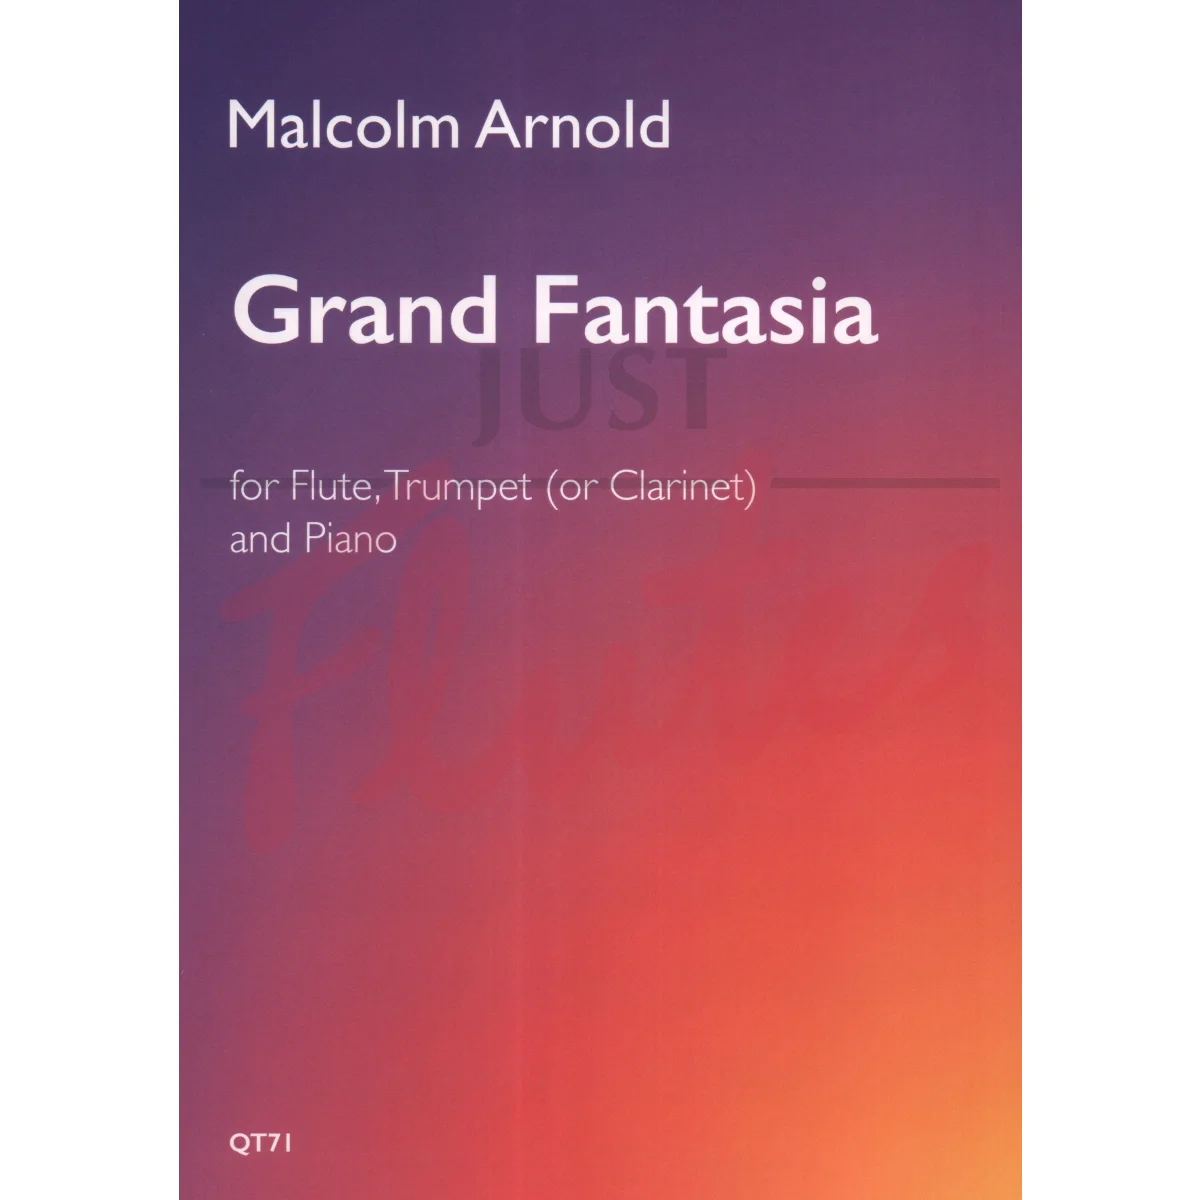 Grand Fantasia for Flute, Clarinet (or Trumpet) and Piano